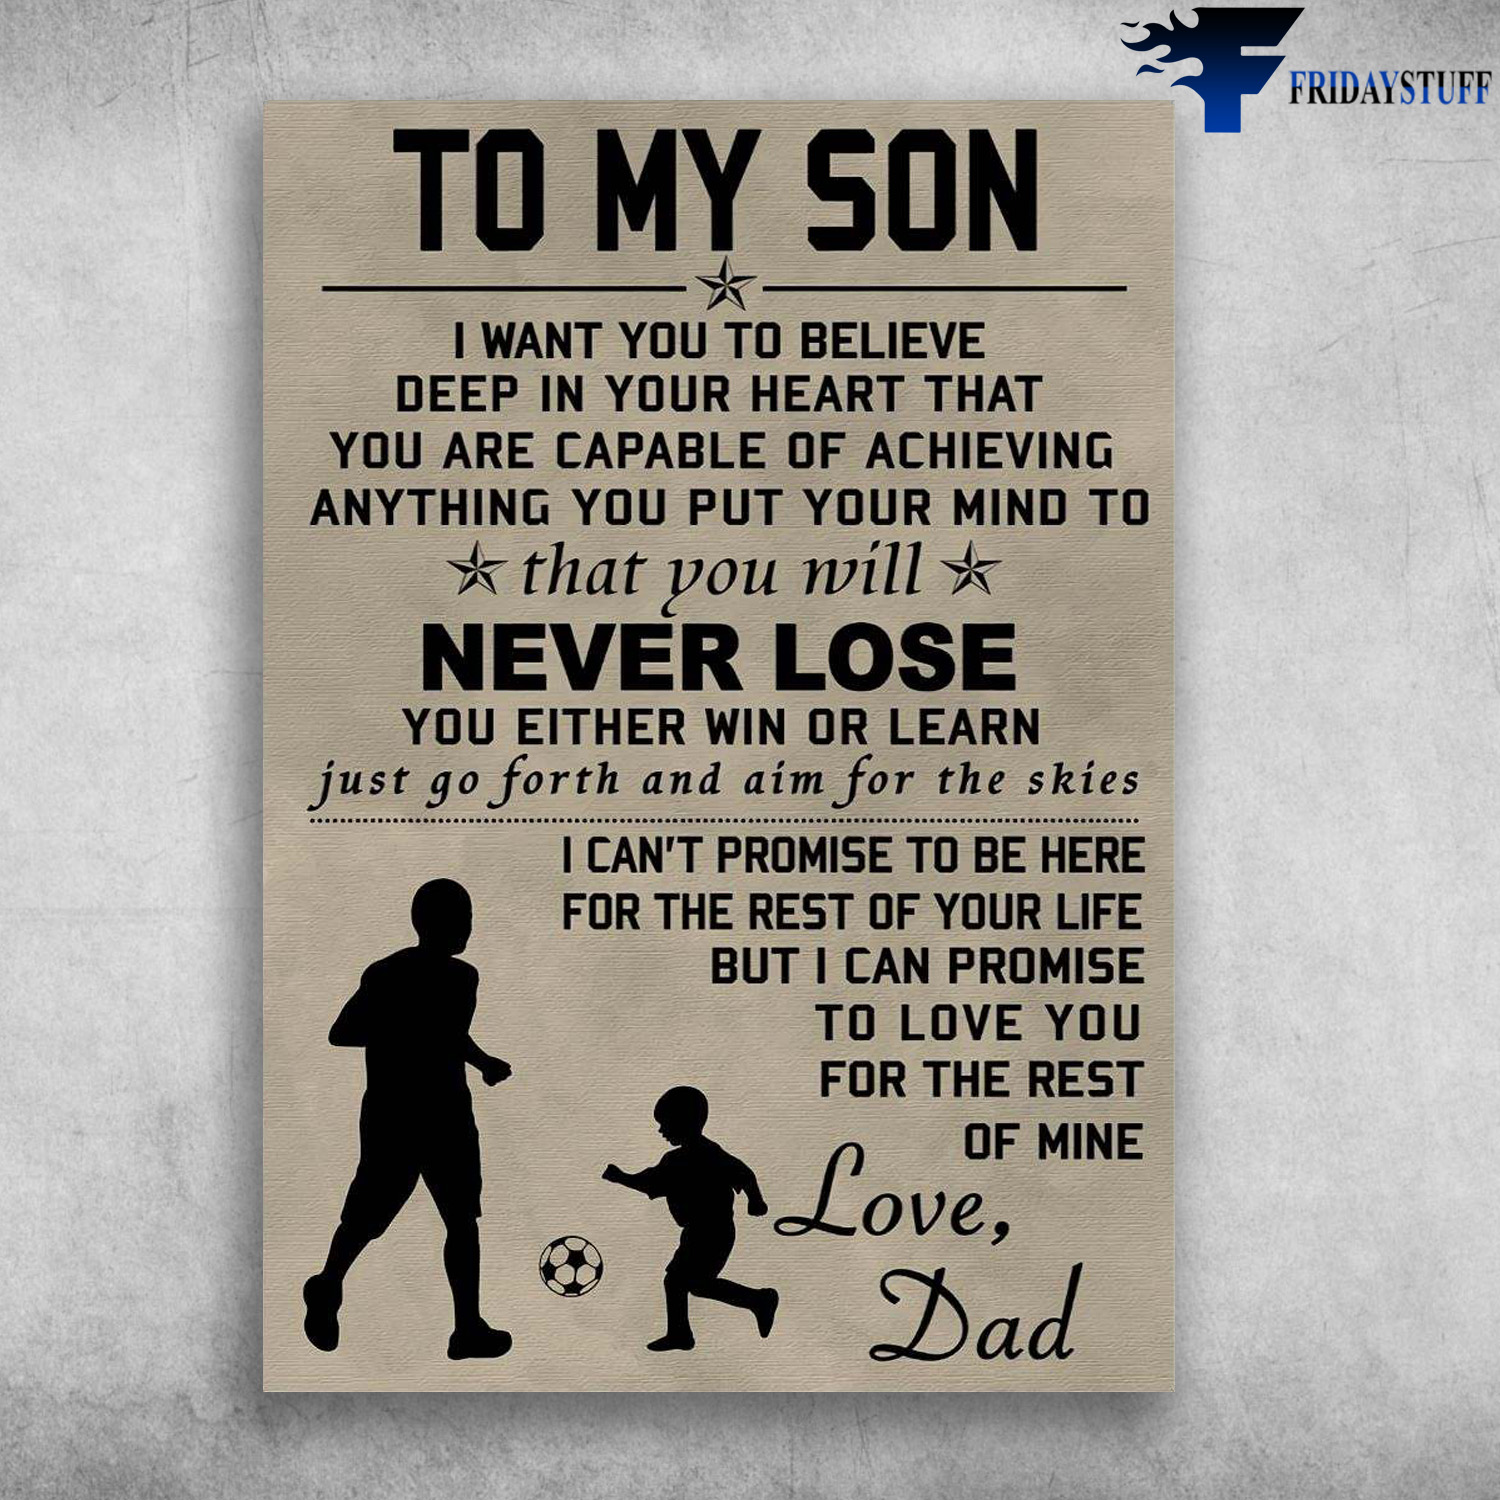 Dad And Son Soccer, Football Lover - To My Son, I Want You To Believe Deep In Your Heart, That You Are Capable Of Achieving, Anything You Put Your Mind To, That You Will Never Lose, Love Dad